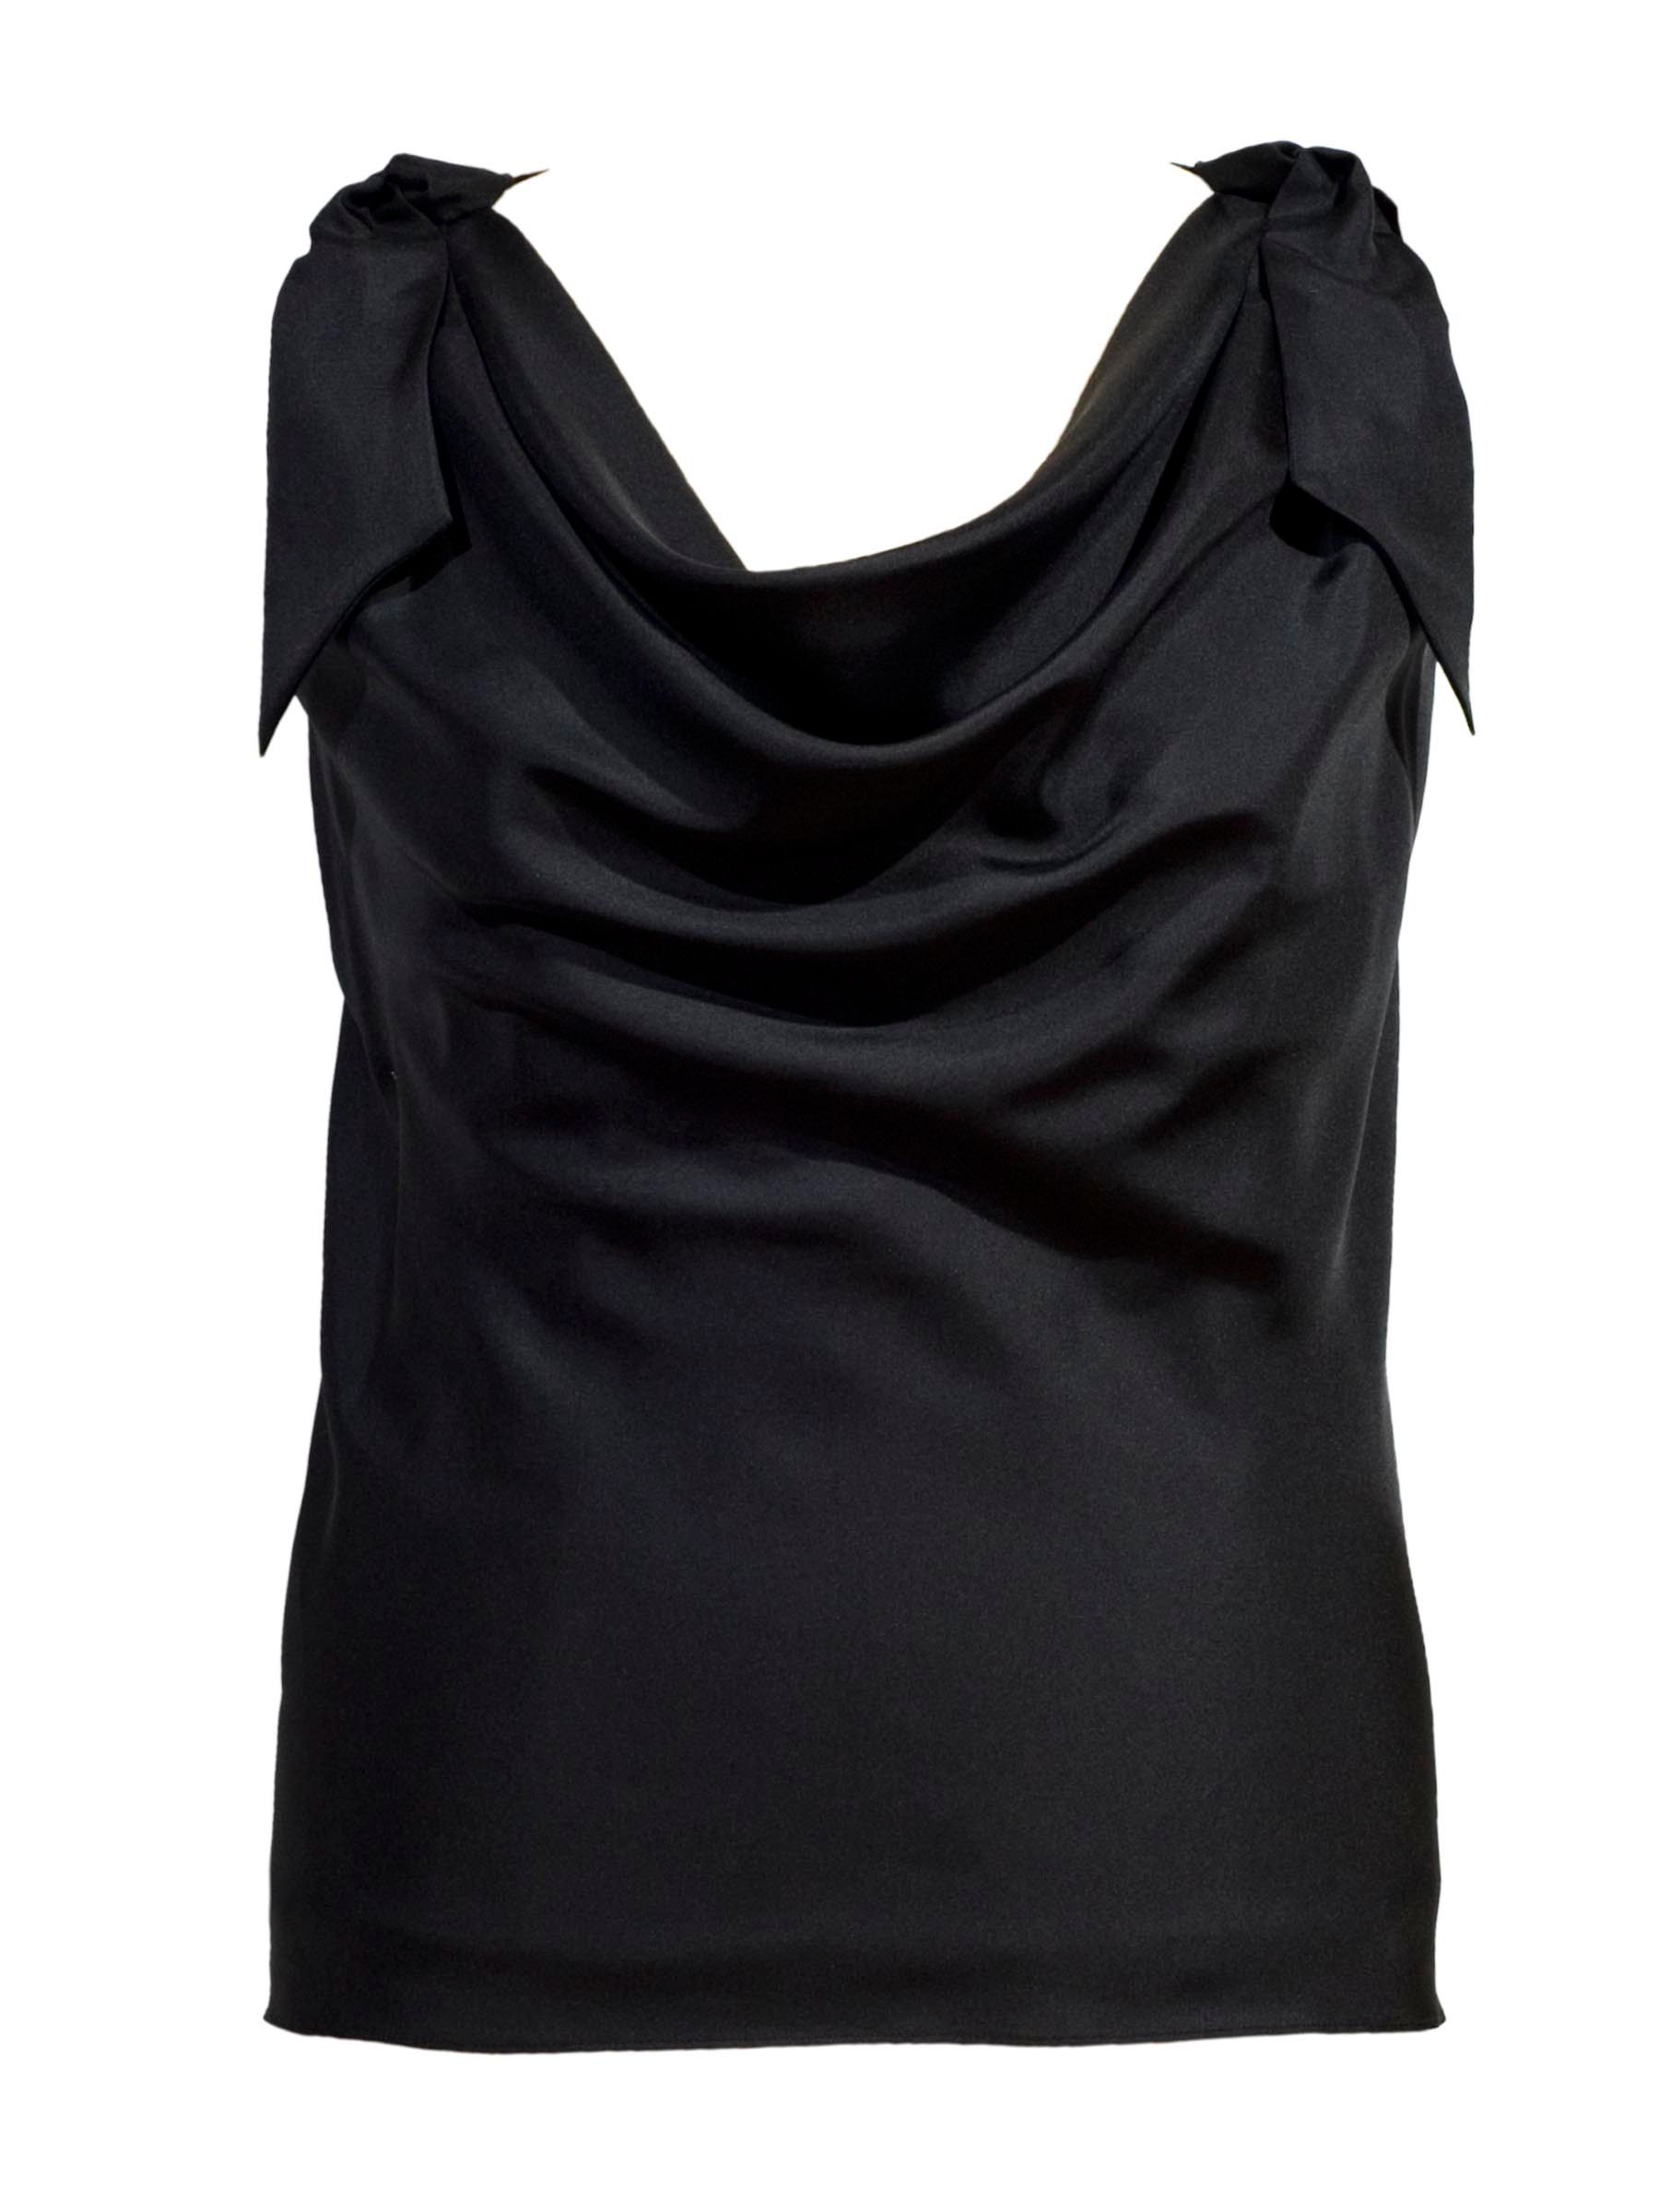 Now By Chesca Knot Shoulder Blouse, Black